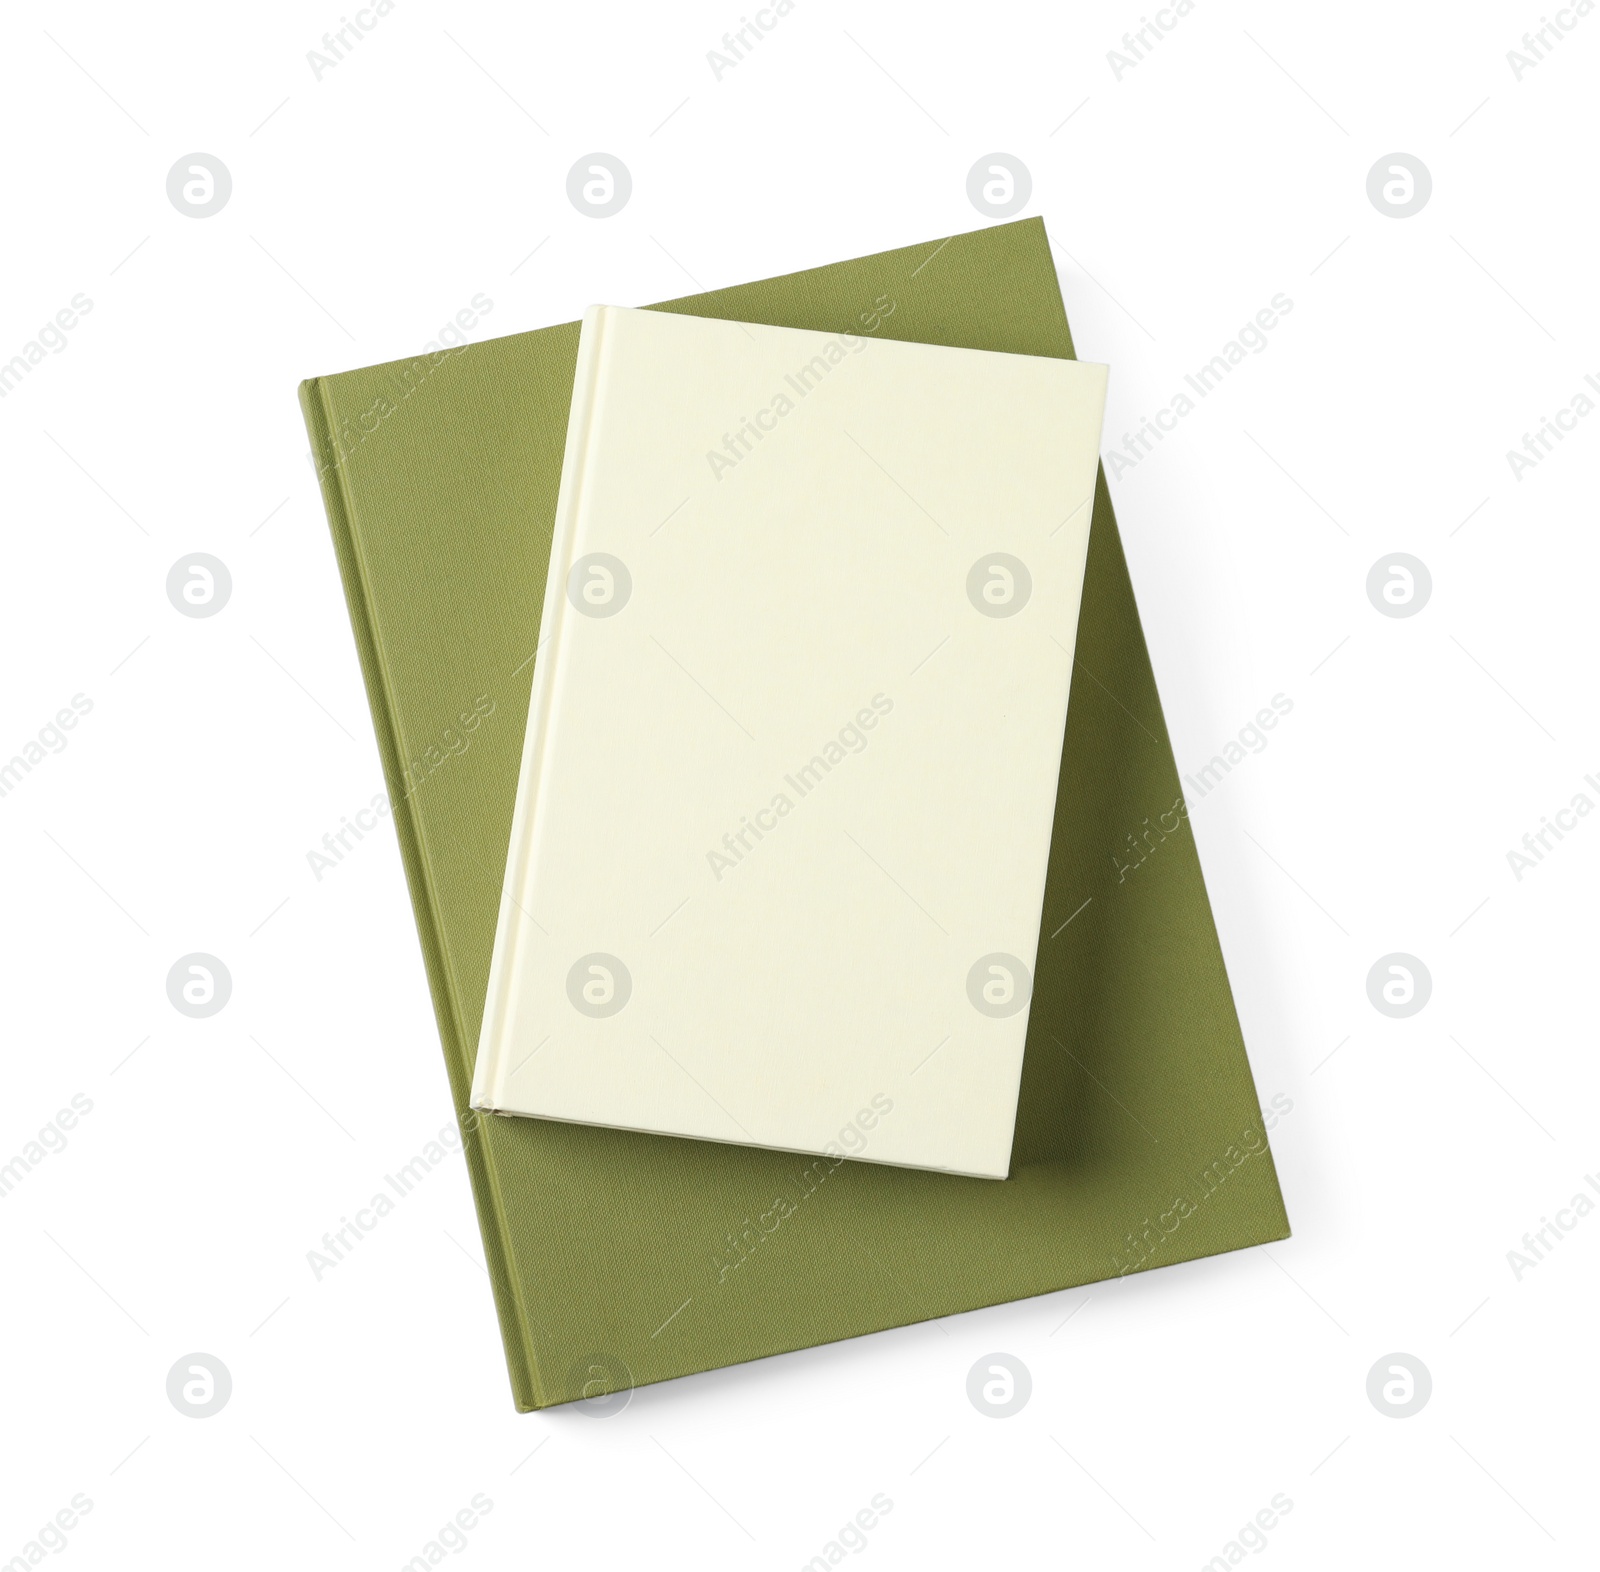 Photo of Hardcover books isolated on white, top view